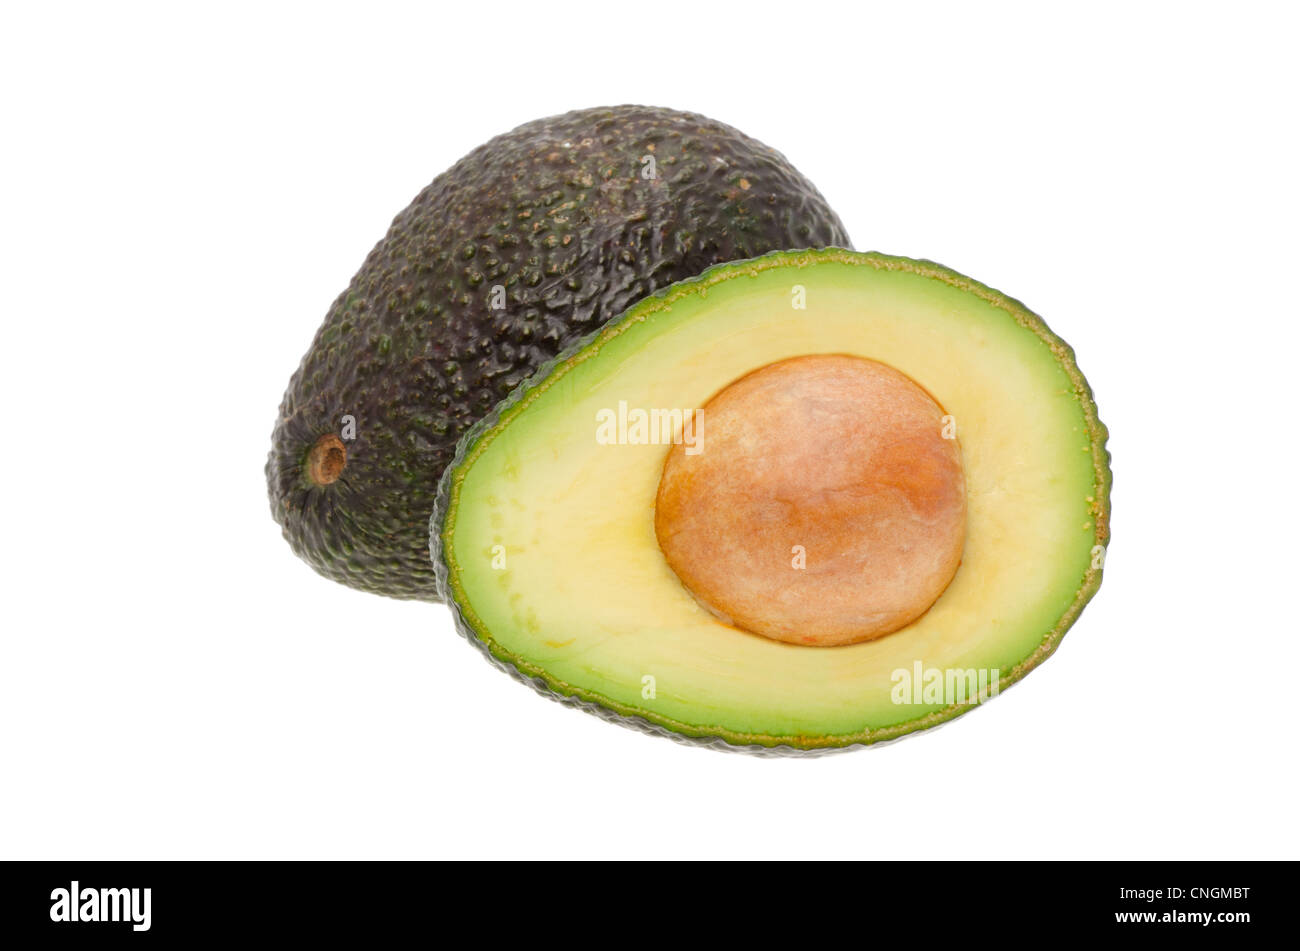 A whole avocado and another cut in half - shot in the studio with a white background Stock Photo